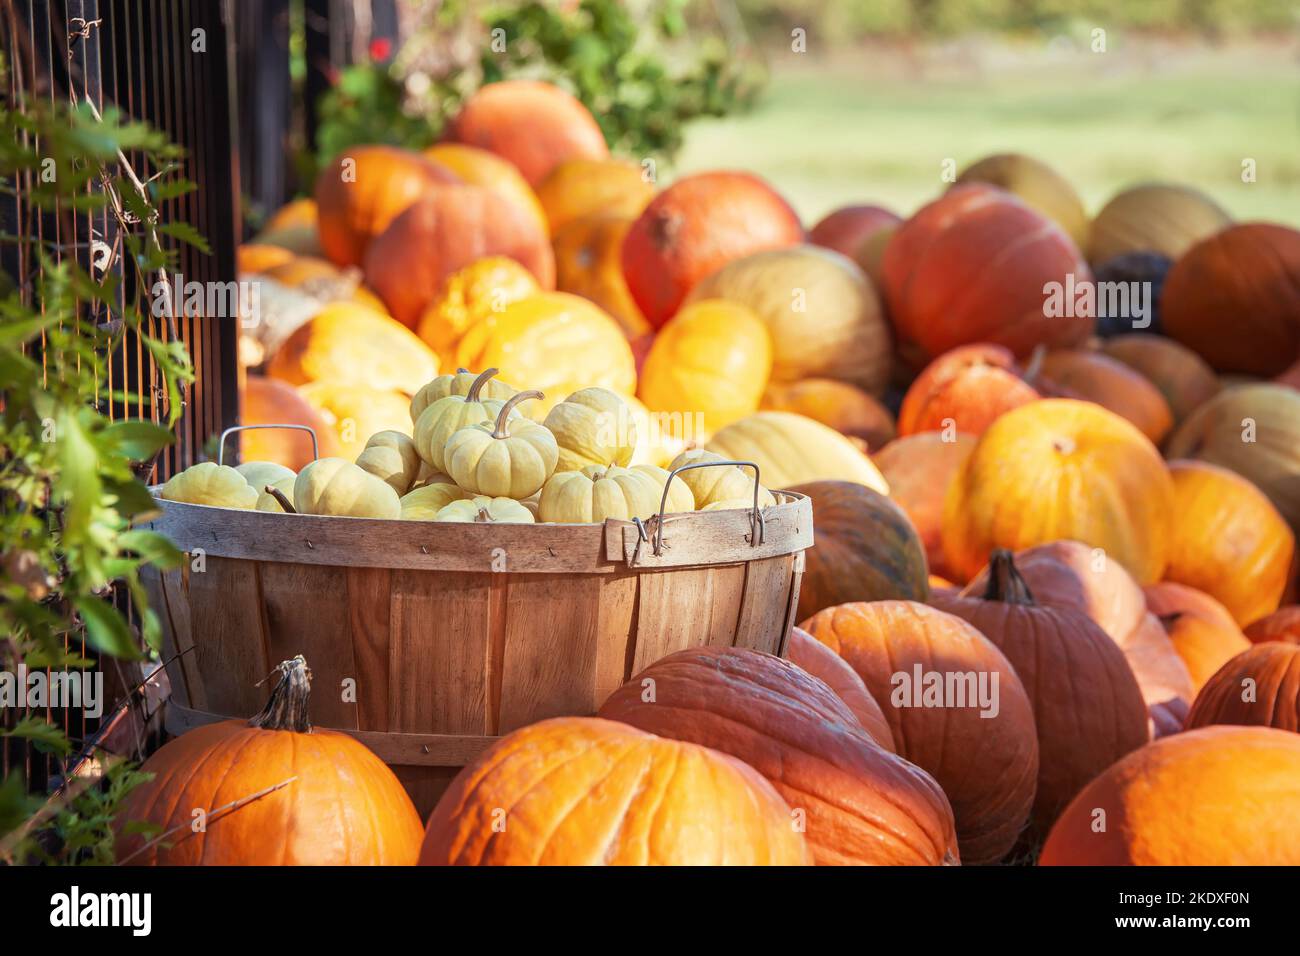 White mini pumpkins in a wood basket on a sunny fall day in the garden. Basket surrounded by pumpkins. Autumn harvesting concept. Stock Photo